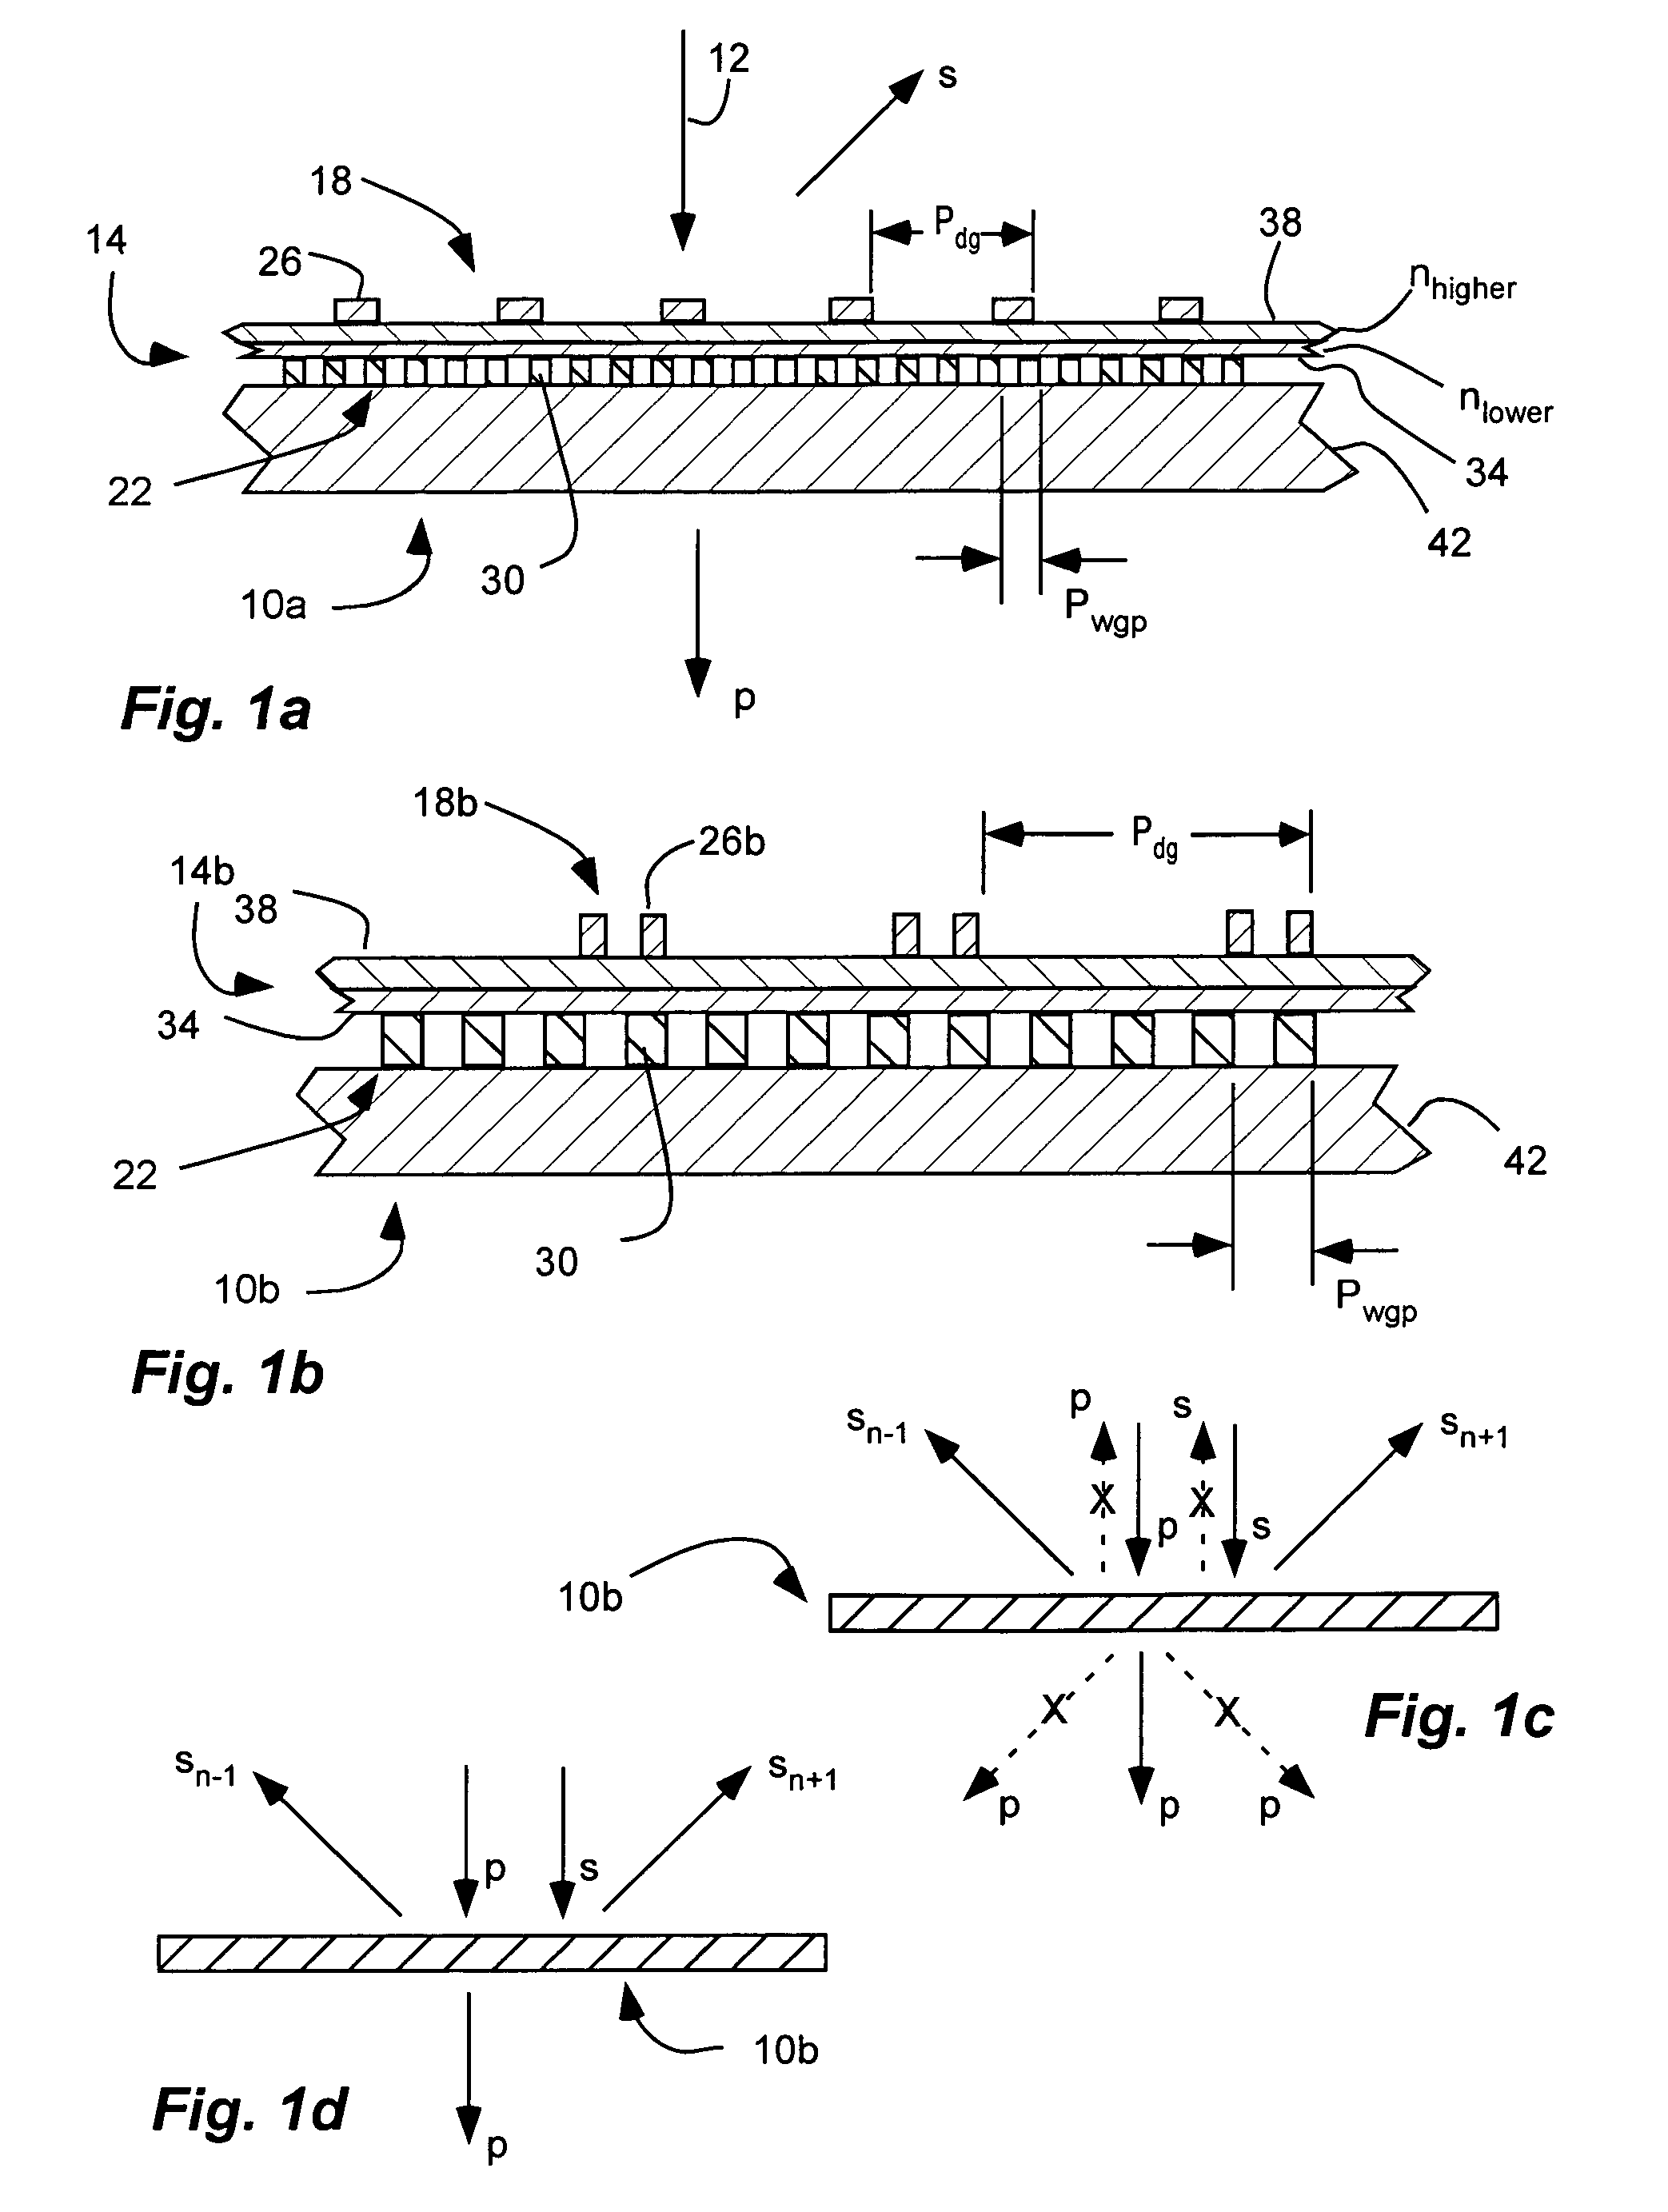 Polarization device to polarize and further control light